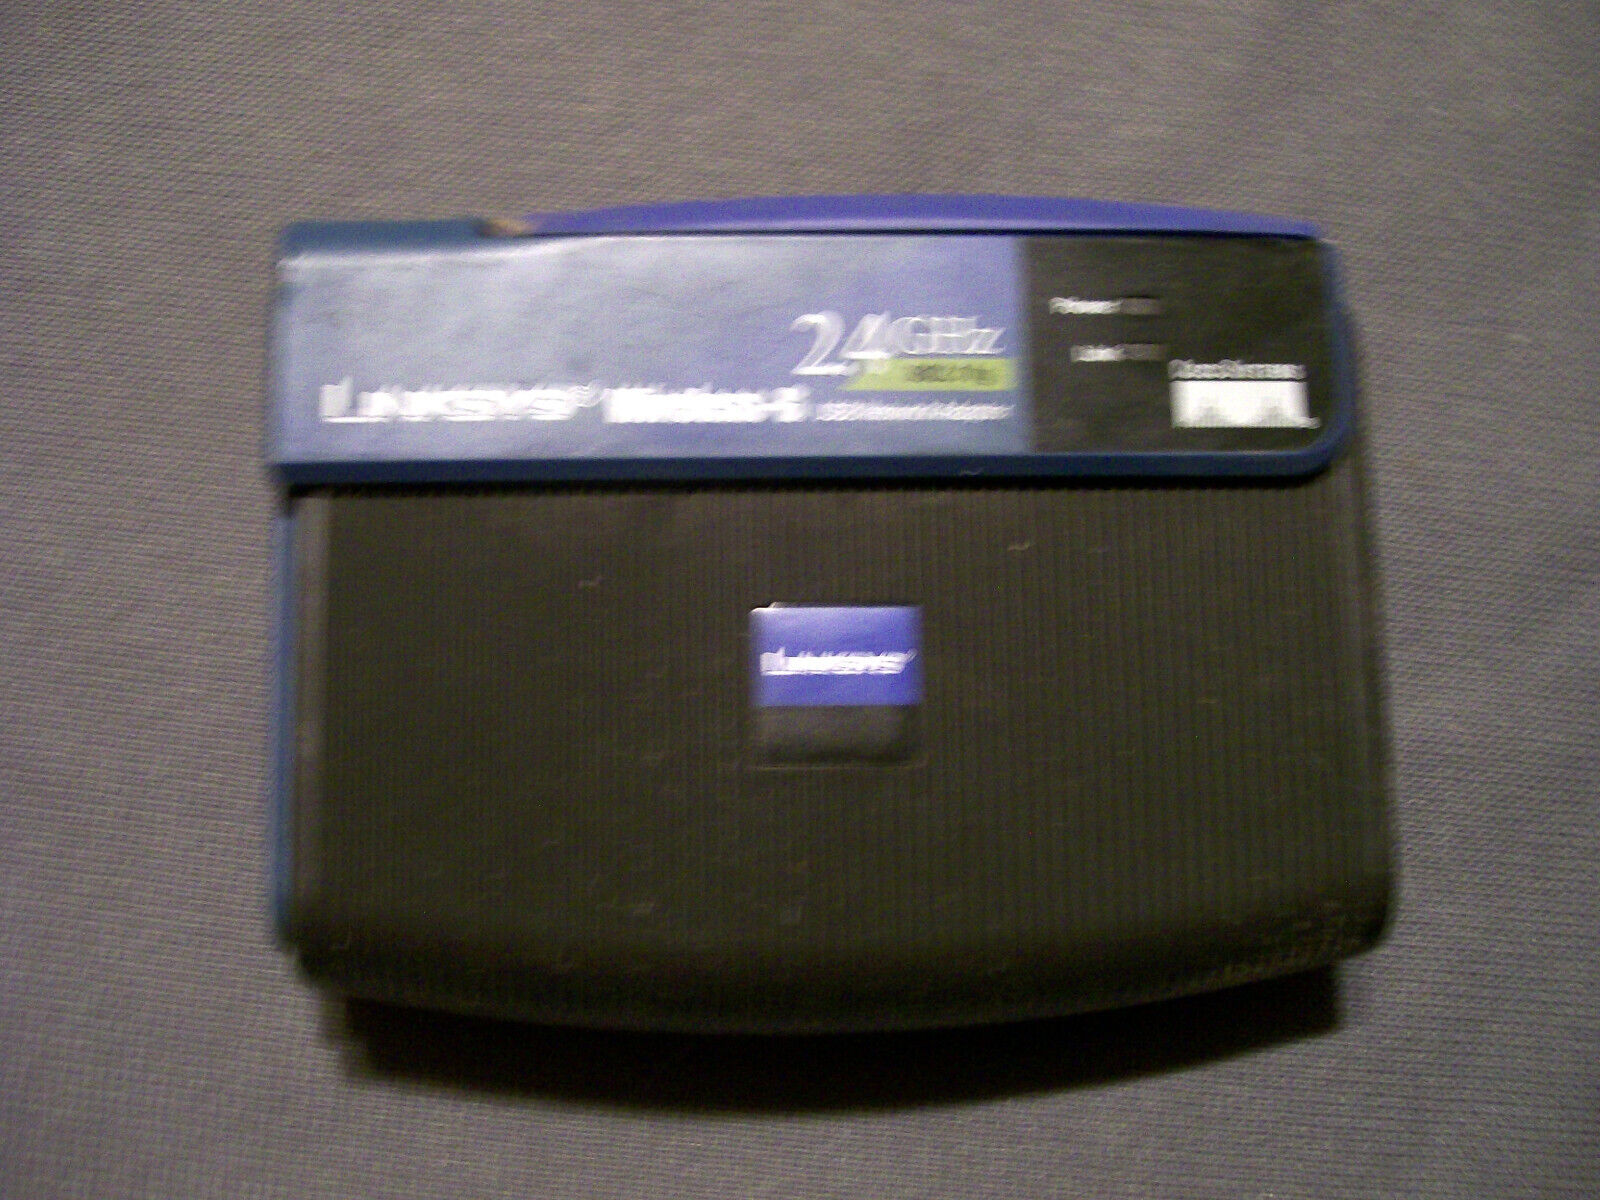 LINKSYS WIRELESS-G 2.4 GHZ 802.11g UNIT ONLY NO CORDS